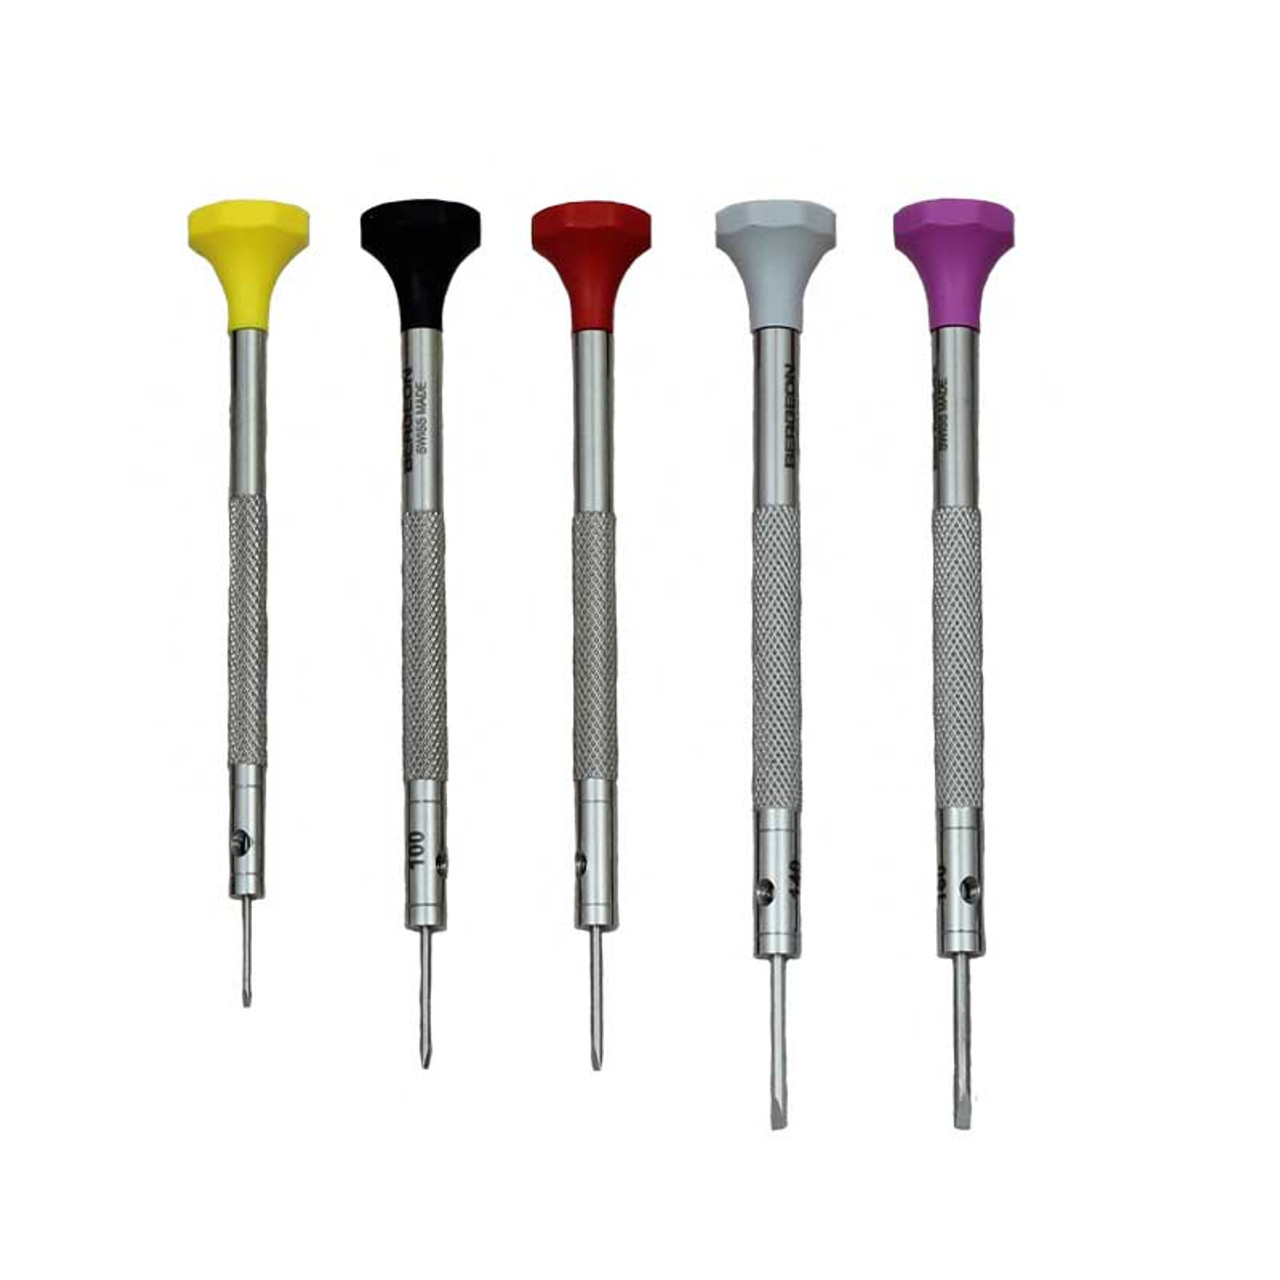 Bergeon 30081/P05 Screwdriver Set, 5 Pieces with Pouch, Stainless Steel Screwdriver for Watch Making